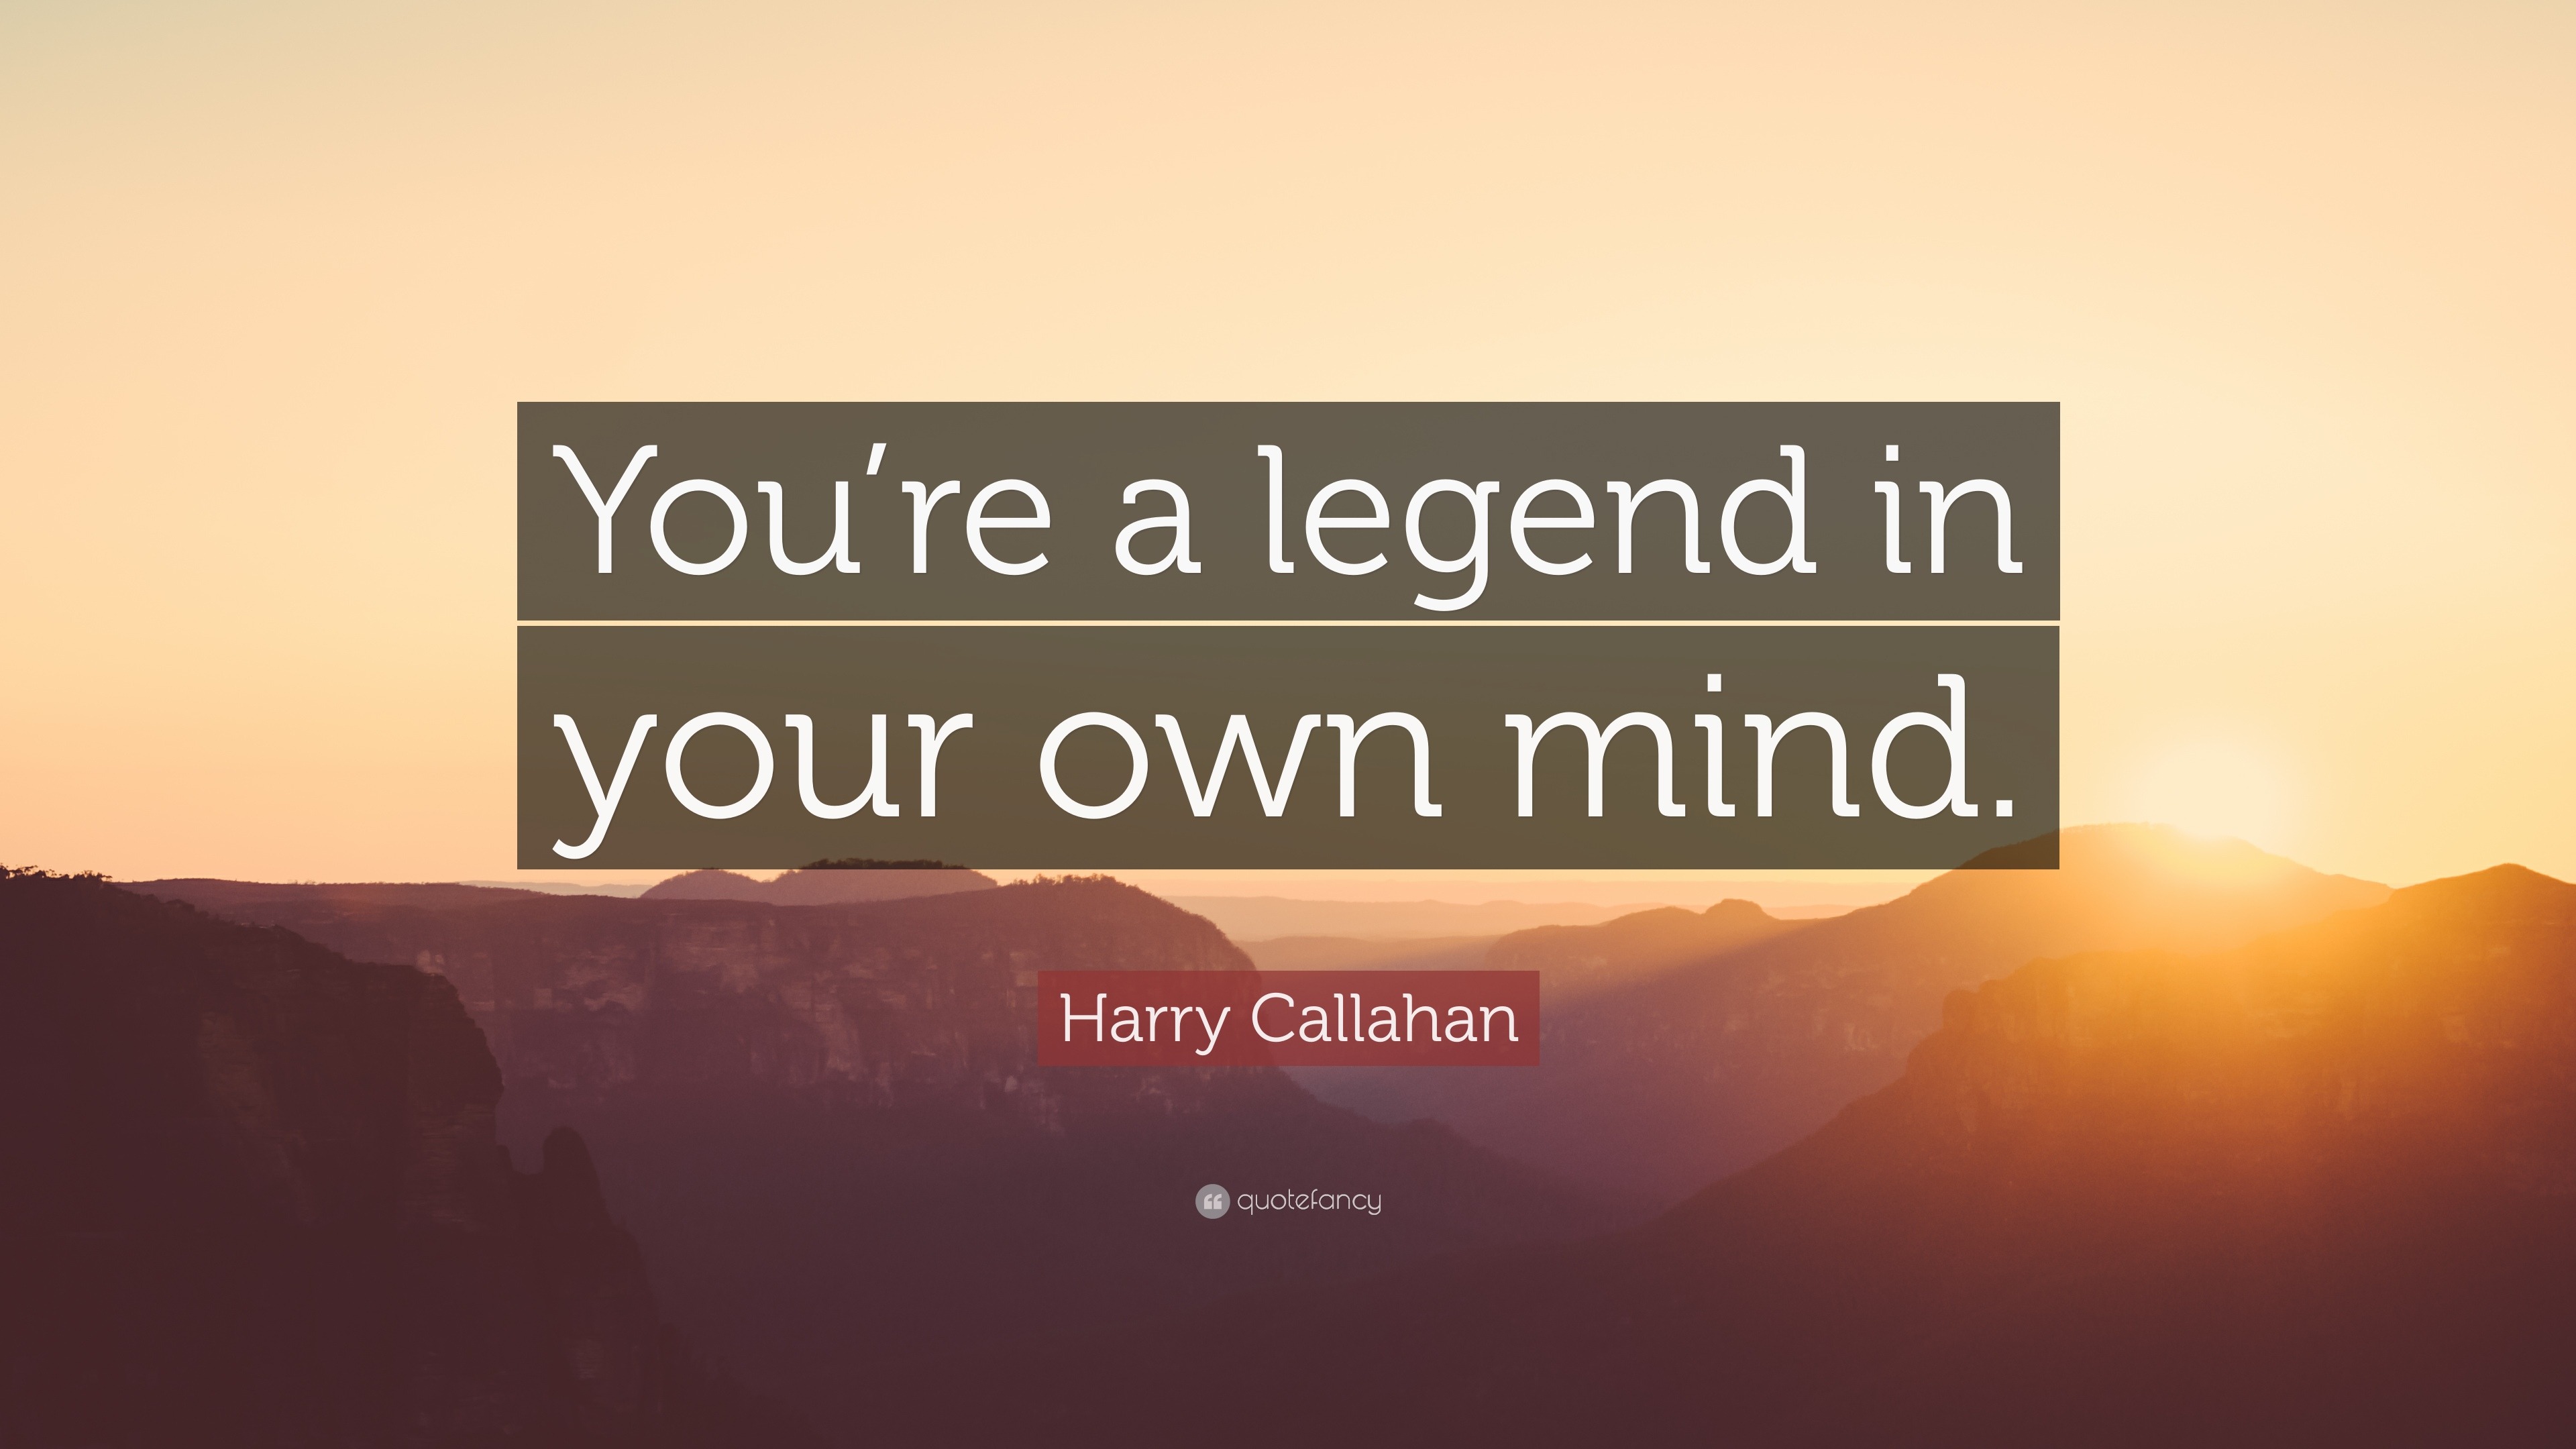 1205904-Harry-Callahan-Quote-You-re-a-legend-in-your-own-mind.jpg